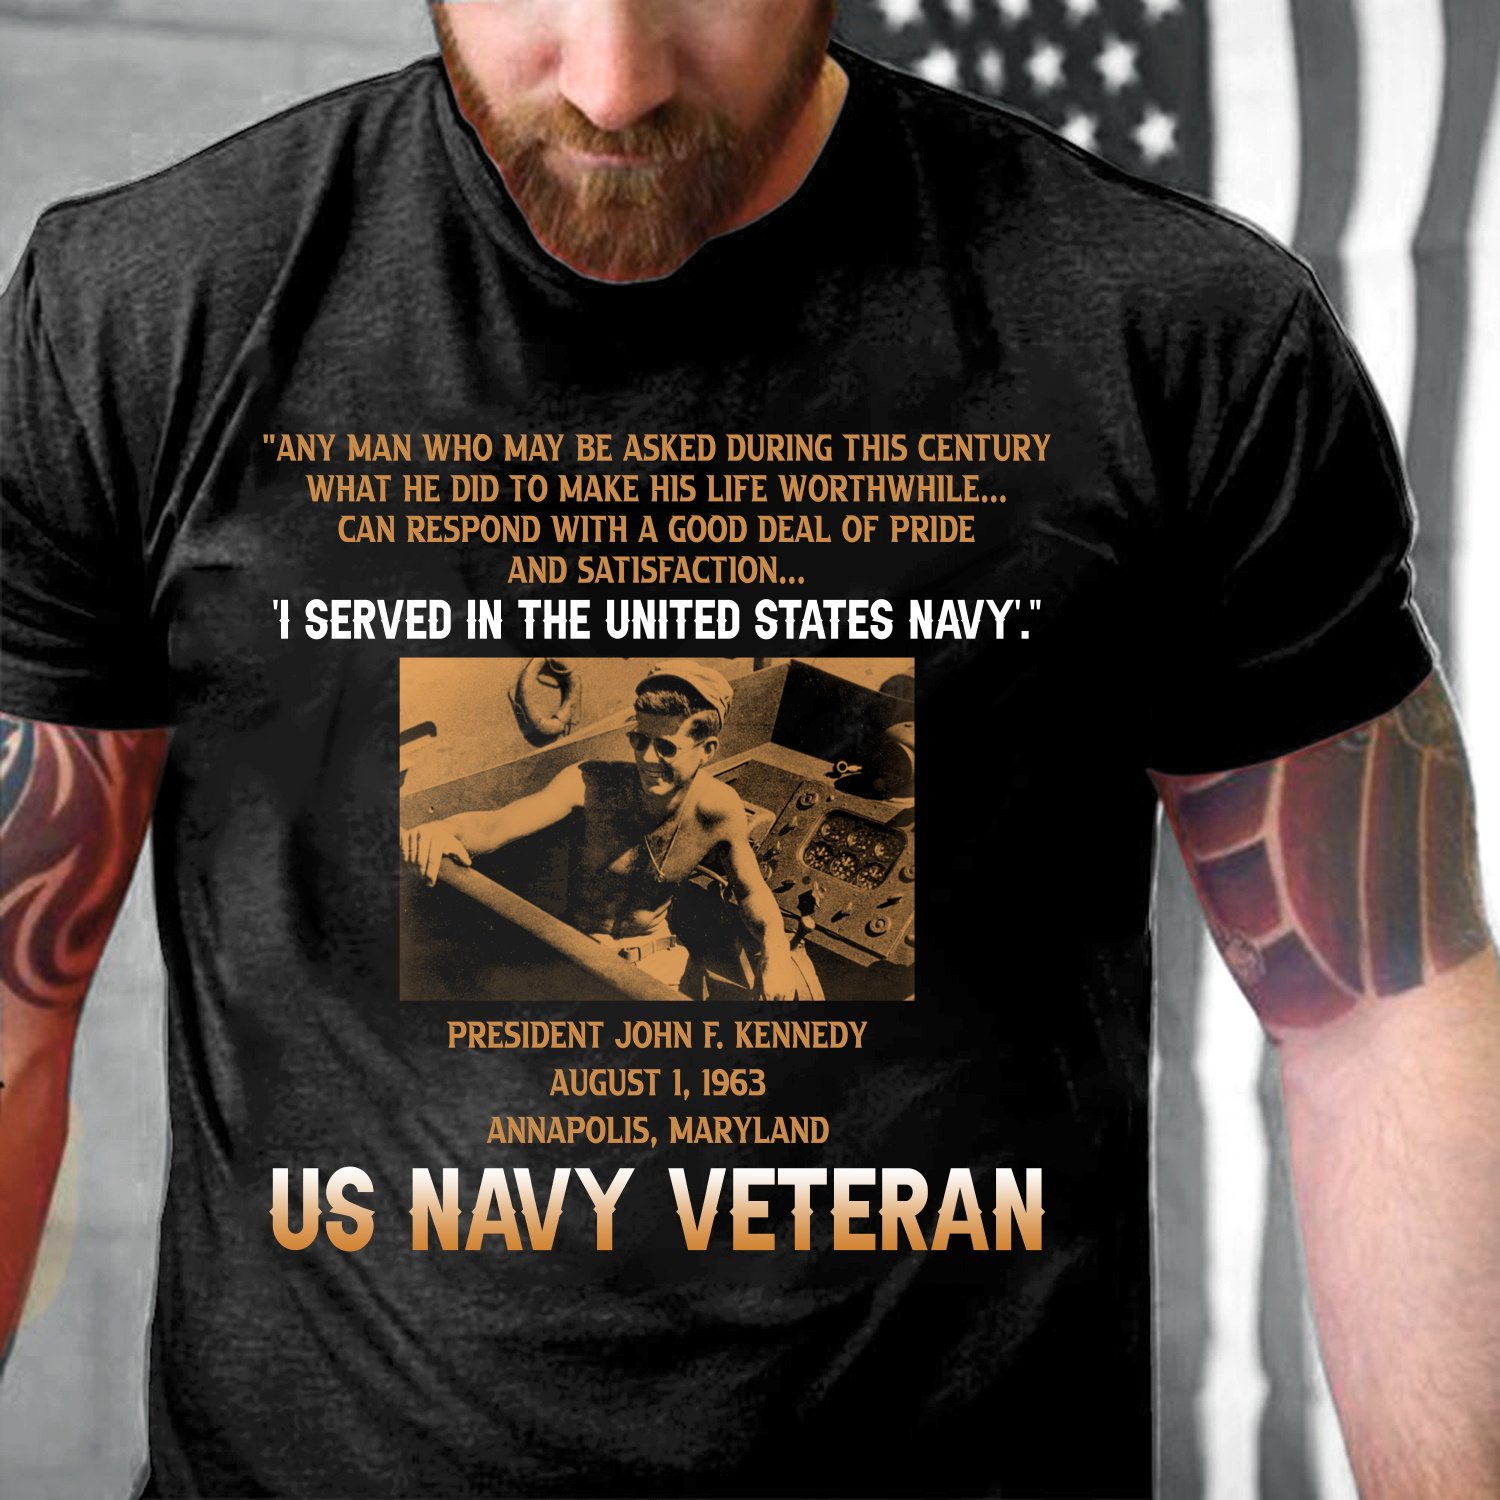 Veteran Shirt, I Once Took A Solemn Oath To Defend The Constitution Double Side Printed T-Shirt